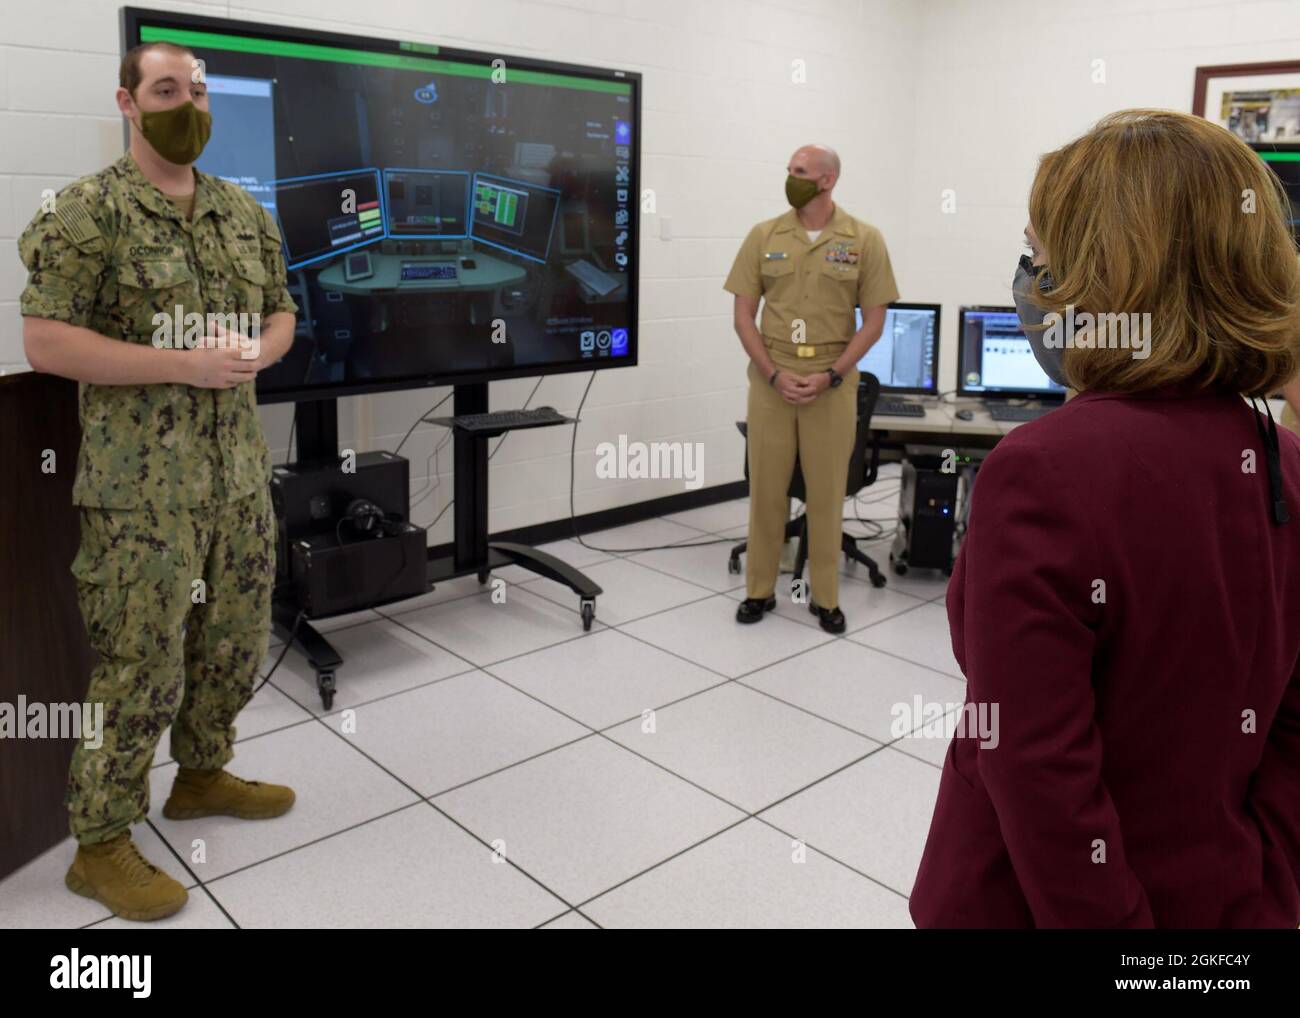 210408-N-XX139-0049 PENSACOLA, Fla. (April 8, 2020) Deputy Secretary of Defense Kathleen H. Hicks participates in a Multipurpose Reconfigurable Training System 3D® (MRTS 3D®) technology training device demonstration and discussion with staff at the Center for Information Warfare Training and Information Warfare Training Command (IWTC) Corry Station. Hicks, along with members of her staff, visited for a familiarization brief and tour of CIWT and IWTC Corry Station onboard Naval Air Station Pensacola Corry Station, Pensacola, Florida. The visit offered an opportunity to update them on CIWT / IWT Stock Photo